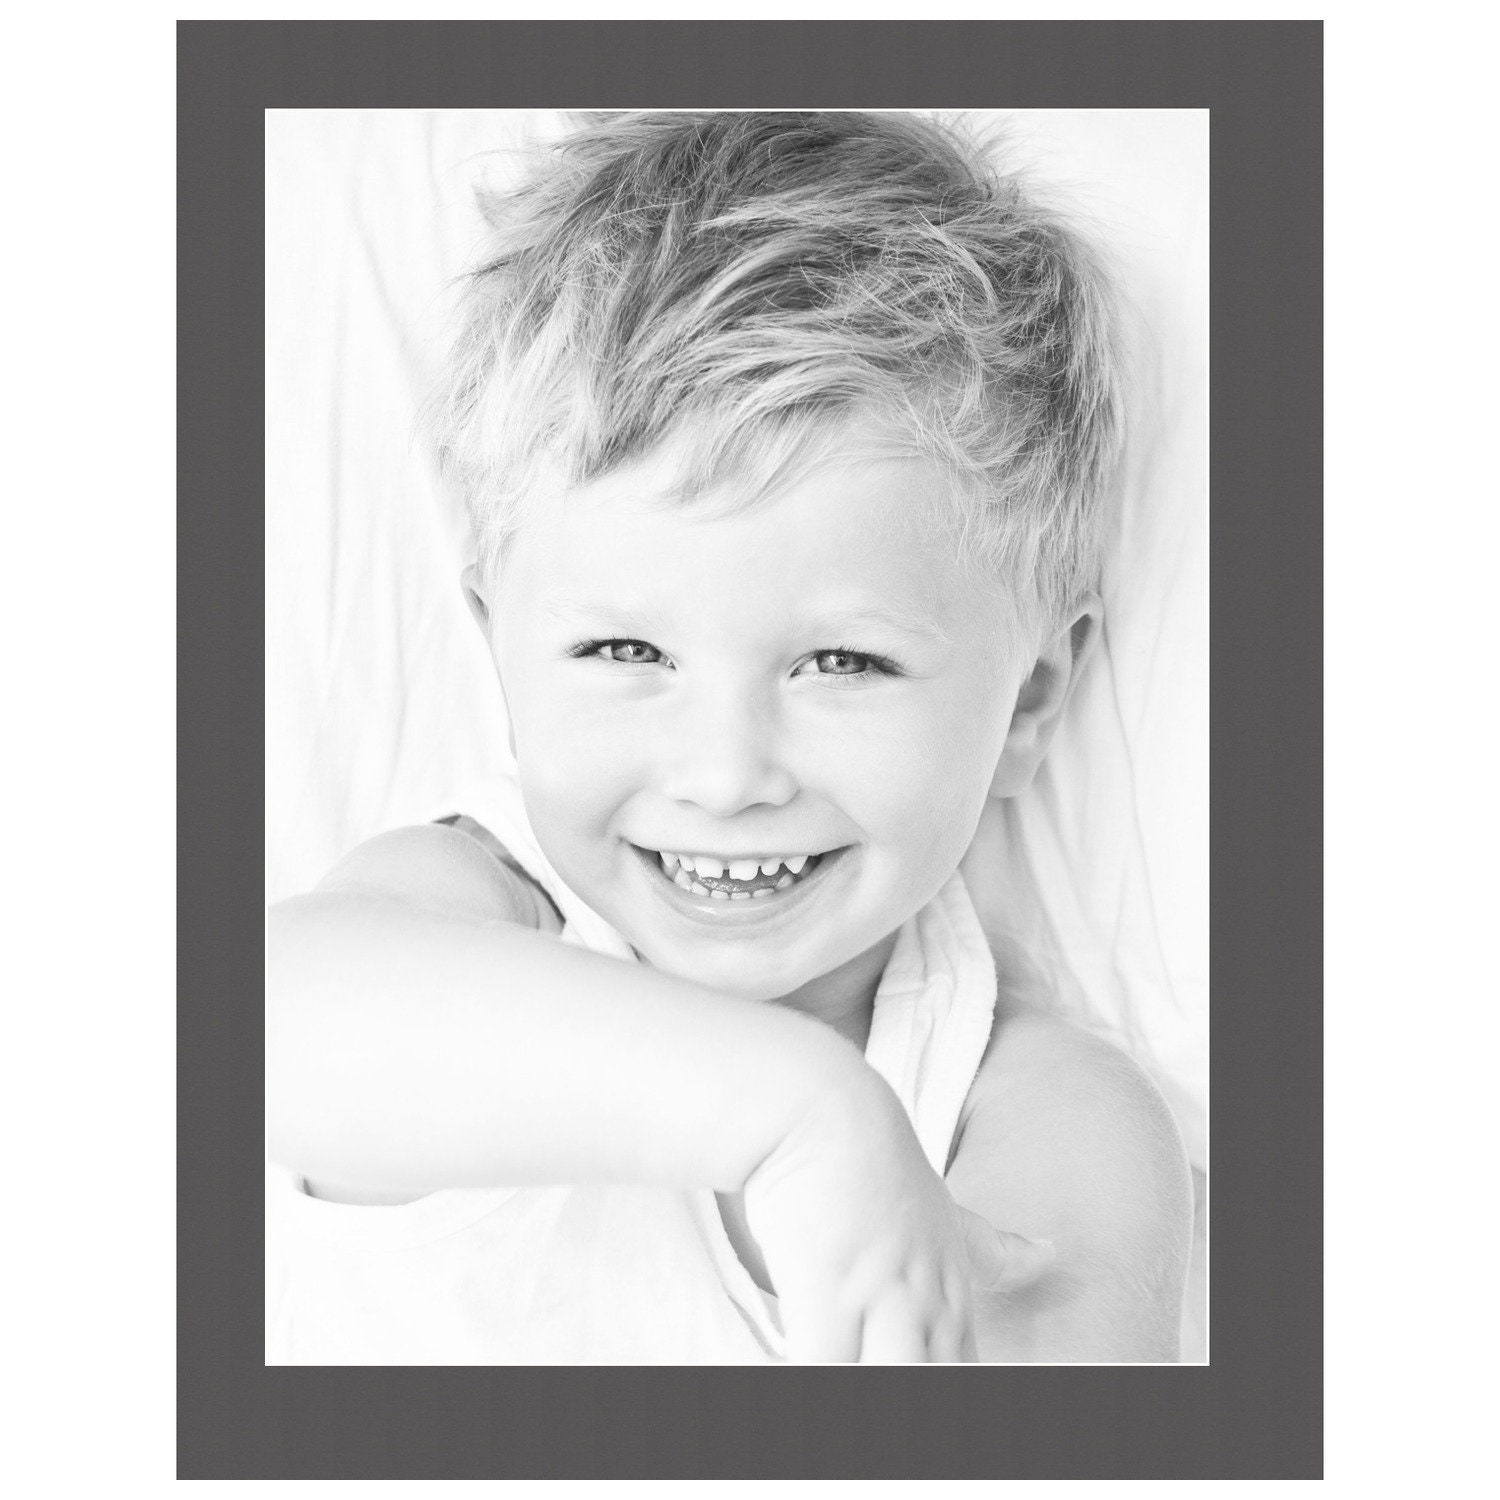 18x24 Mat for 22x28 Frame - Precut Mat Board Acid-Free White 18x24 Photo  Matte Made to Fit a 22x28 Picture Frame, Premium Matboard for Family  Photos